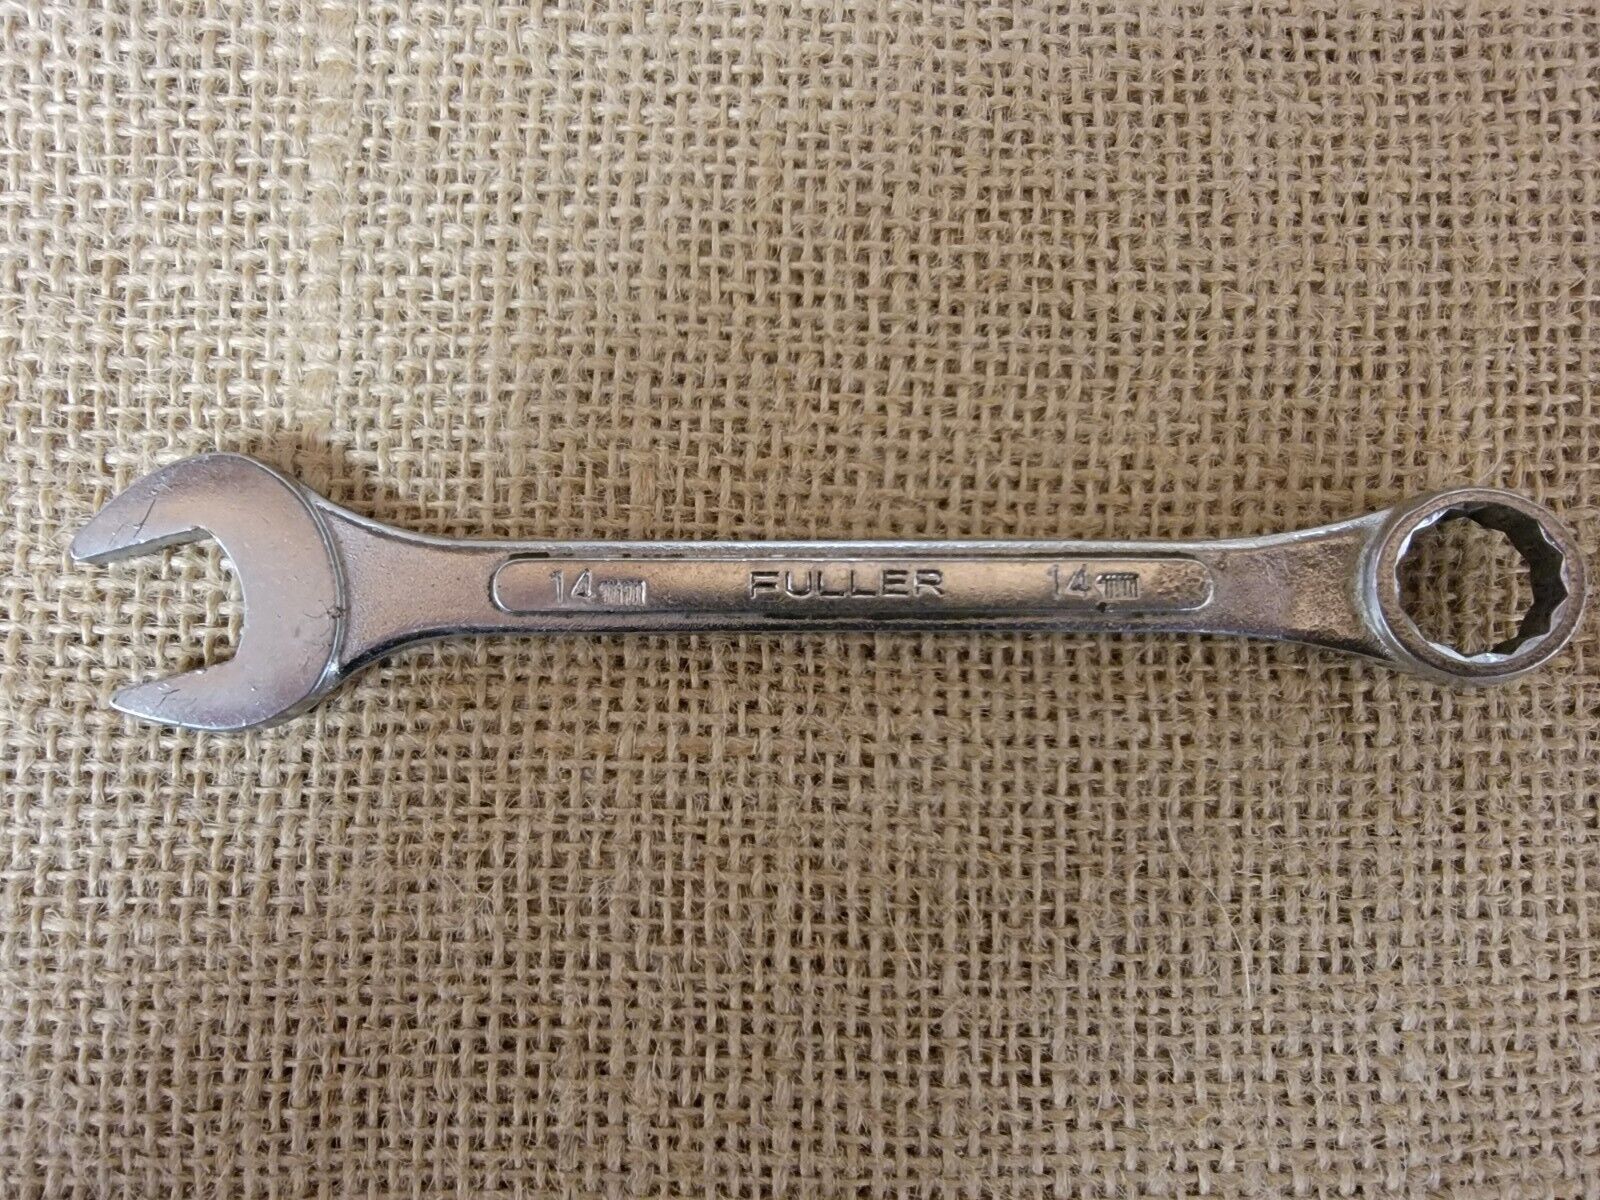 Fuller Combination Metric 14mm Wrench 12 Point